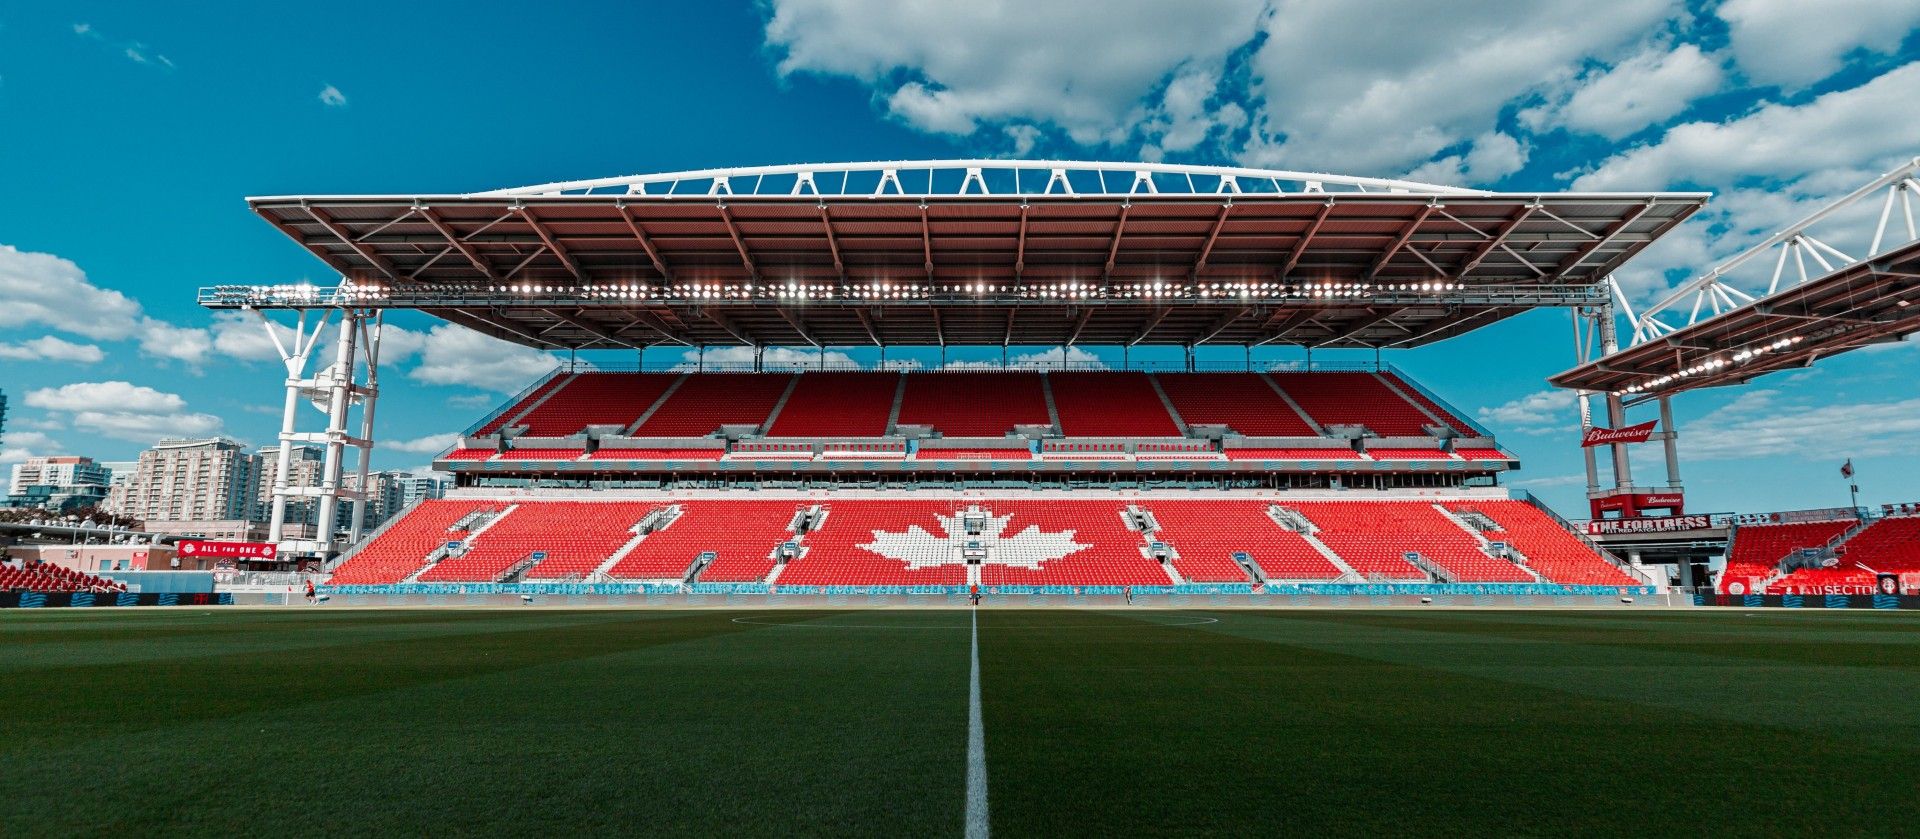 CanMNT Talk: BMO Field to host 2026 World Cup games